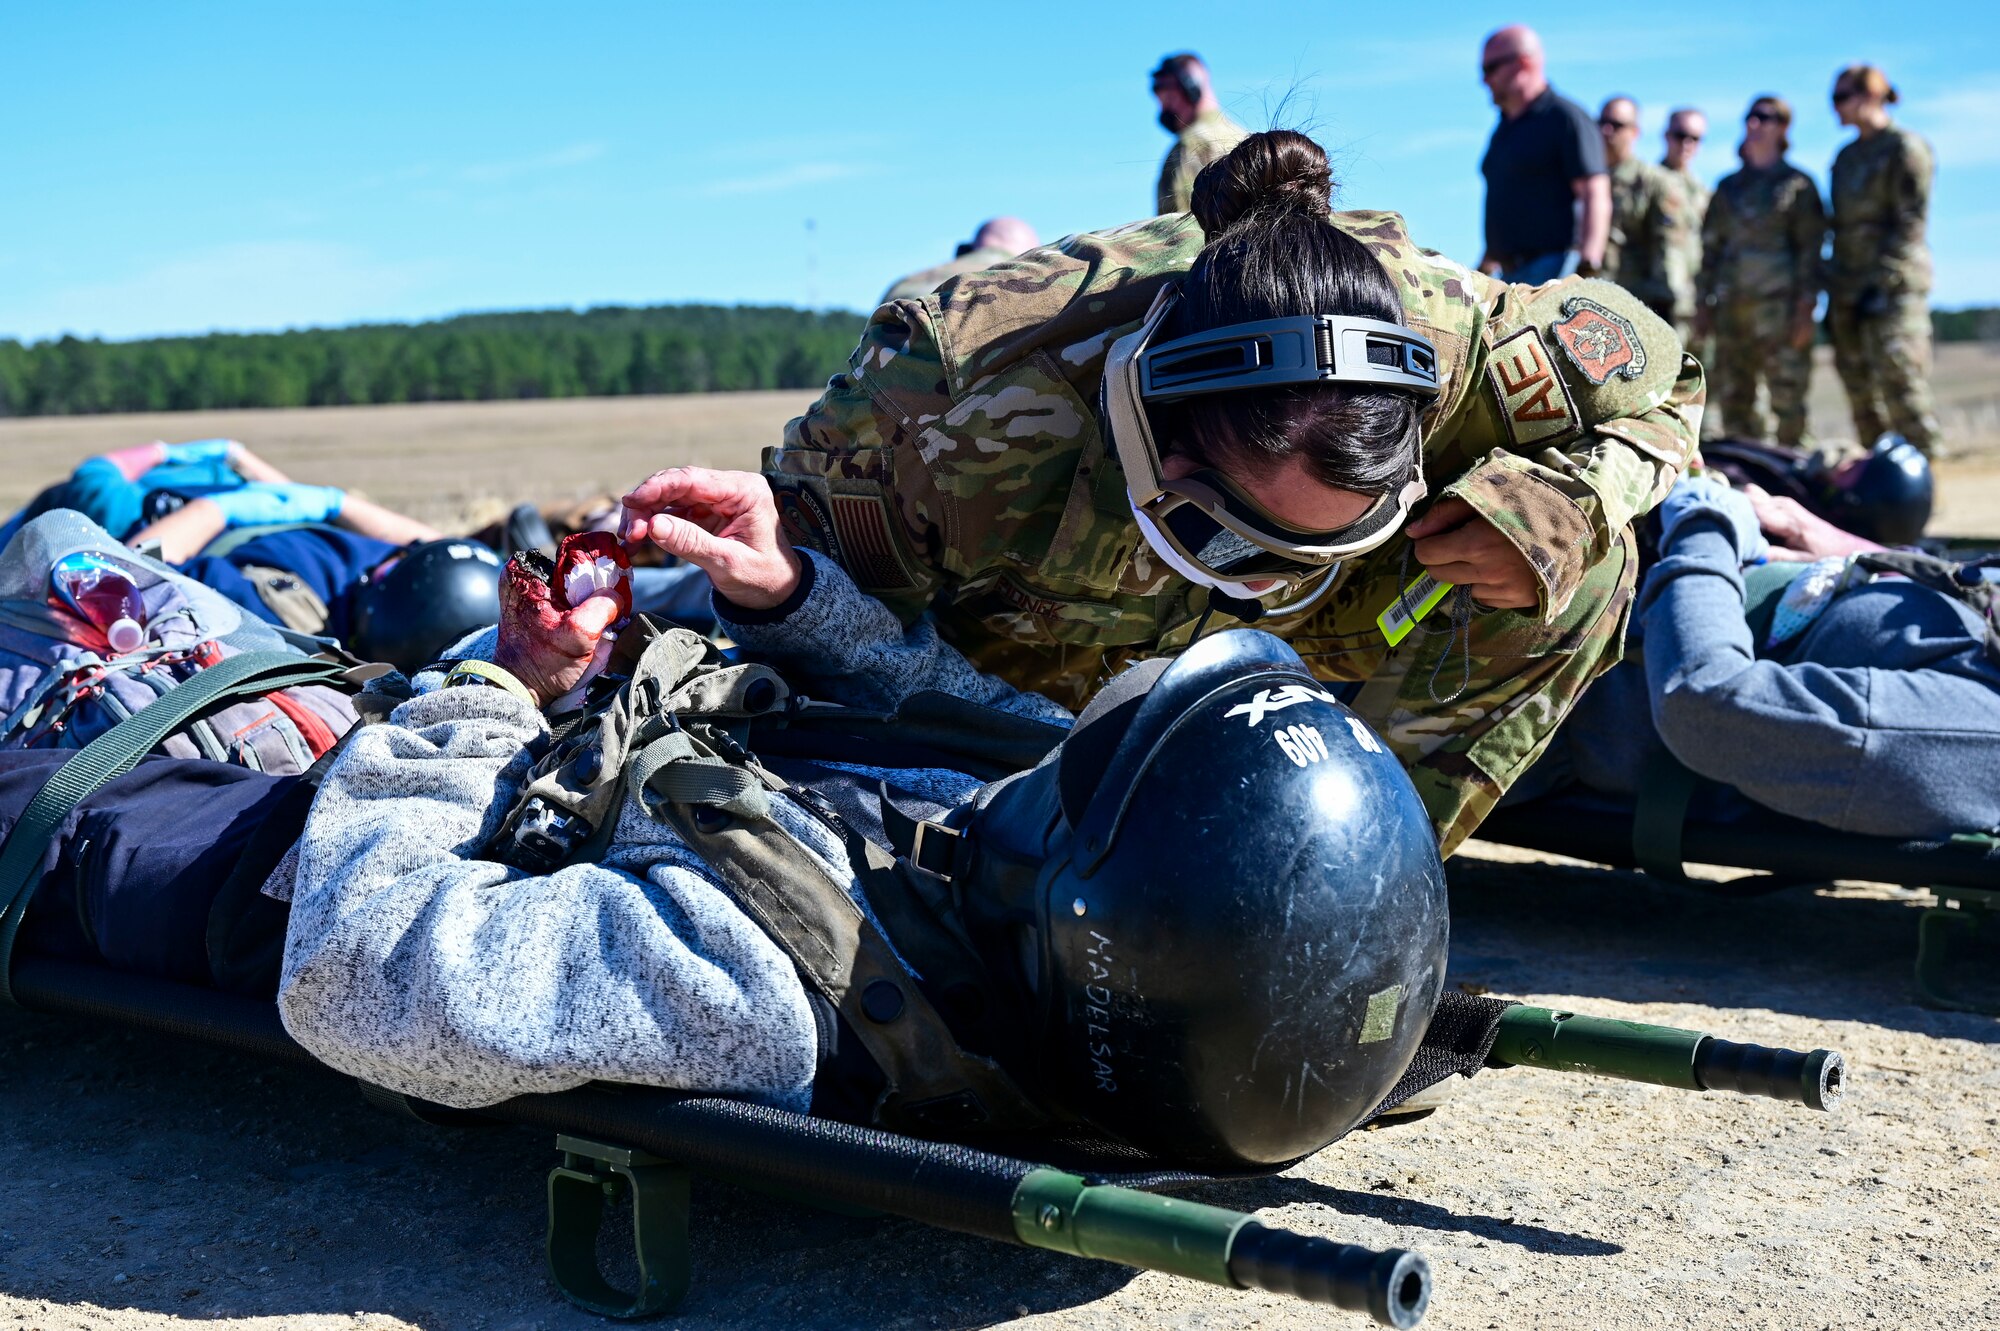 A person treats a patient with simulated injuries during an Aeromedical Evacuation exercise